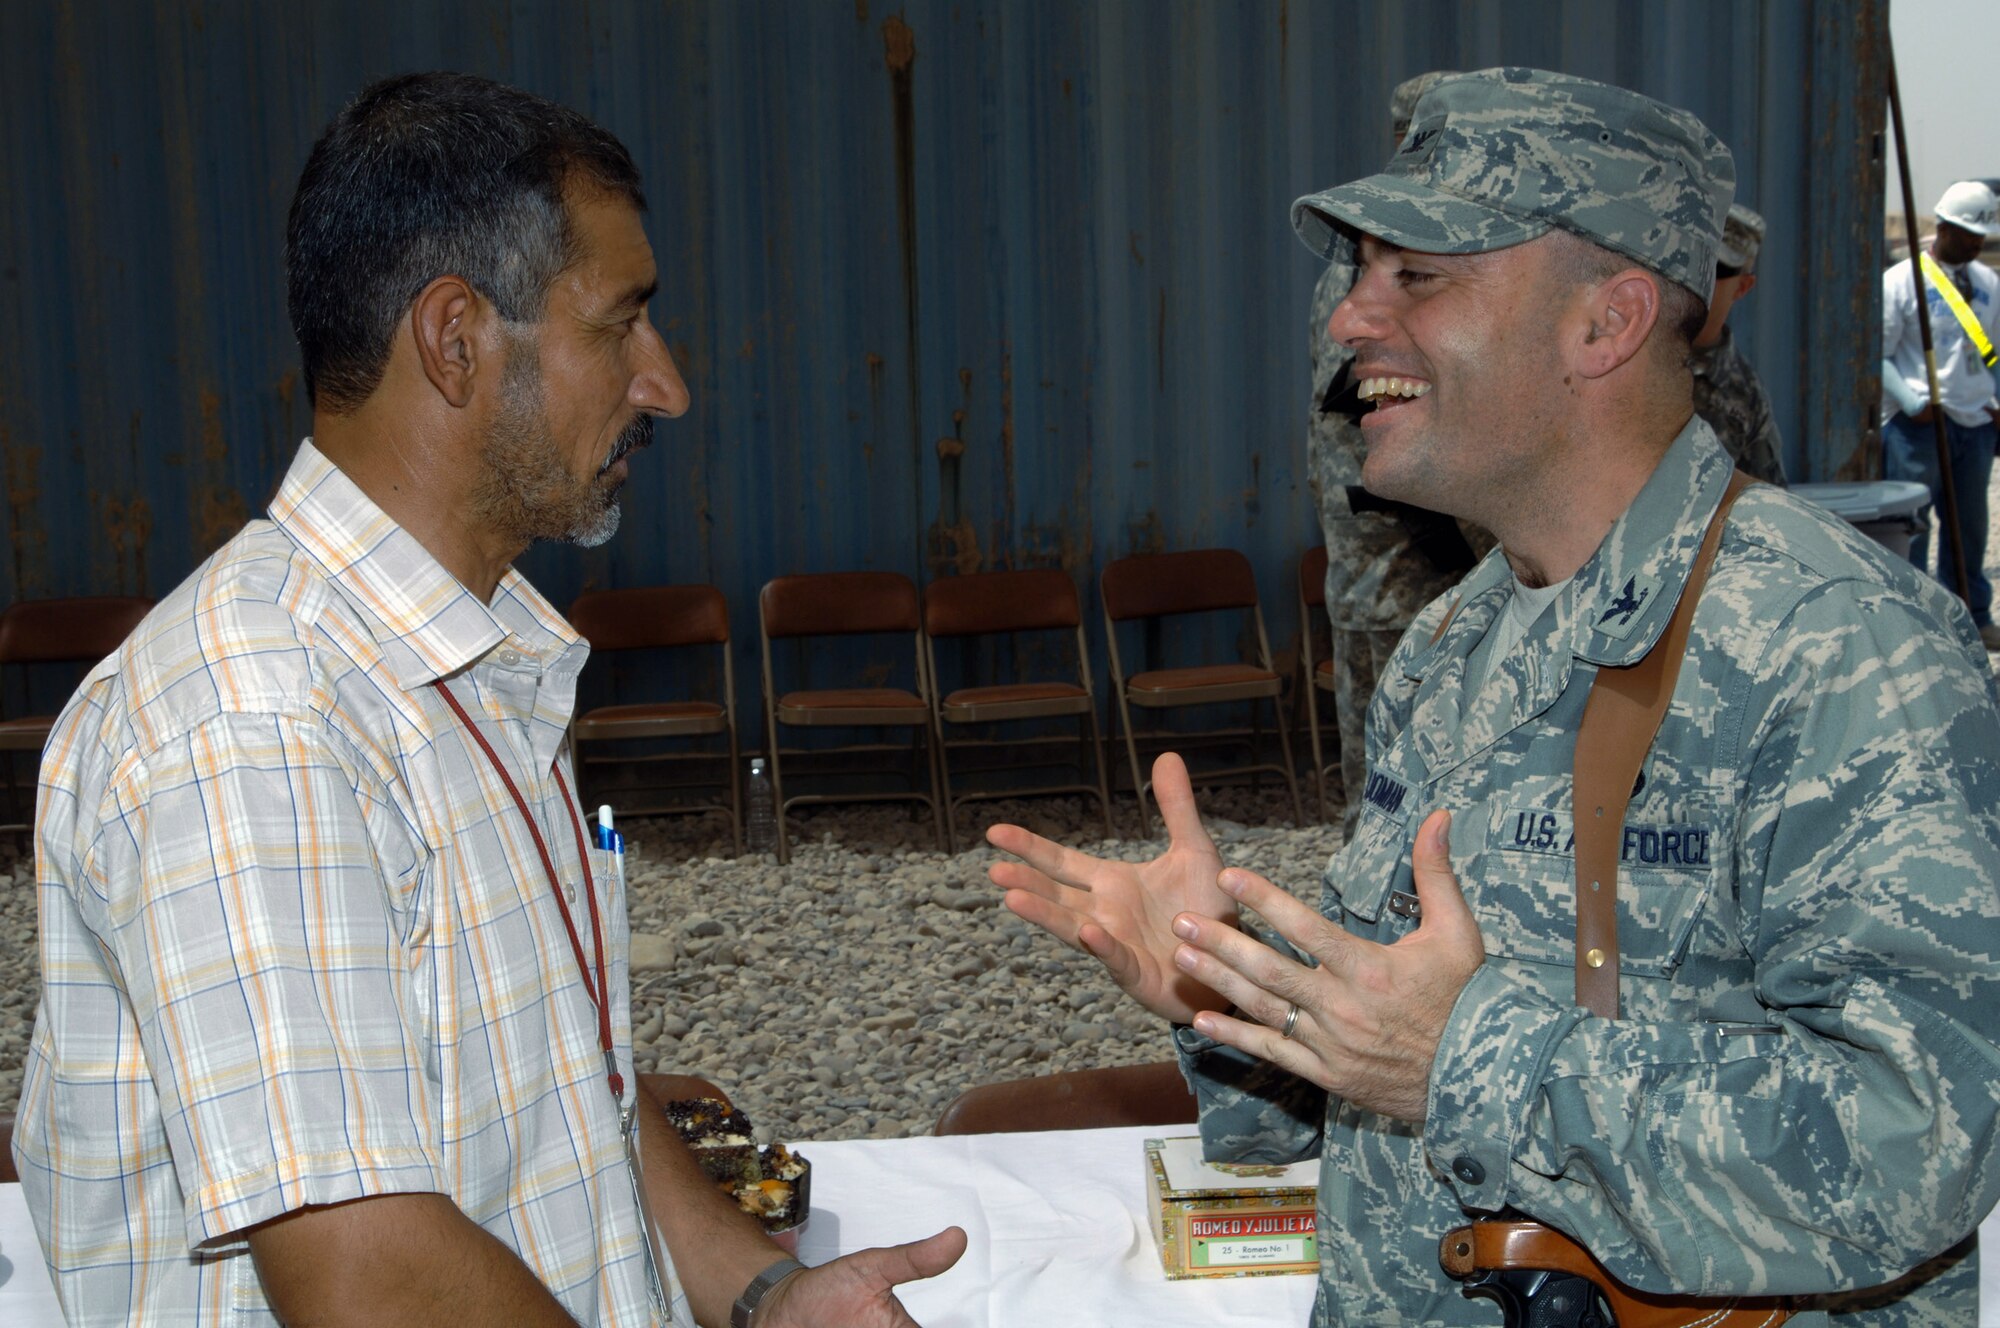 Hashim Abd Al-Amir Mahdi and Col. Sal Nodjomian converse after a ribbon-cutting ceremony to mark the signing of an Iraqi First contract in the Joint Base Balad Iraqi-based Industrial Zone here Aug. 21. The Miran Co. is establishing an I-BIZ business on base that will create approximately 70 jobs for Iraqis in six months. Colonel Nodjomian is the 332nd Expeditionary Mission Support Group commander. (U.S. Air Force photo/Tech. Sgt. Erik Gudmundson) 
